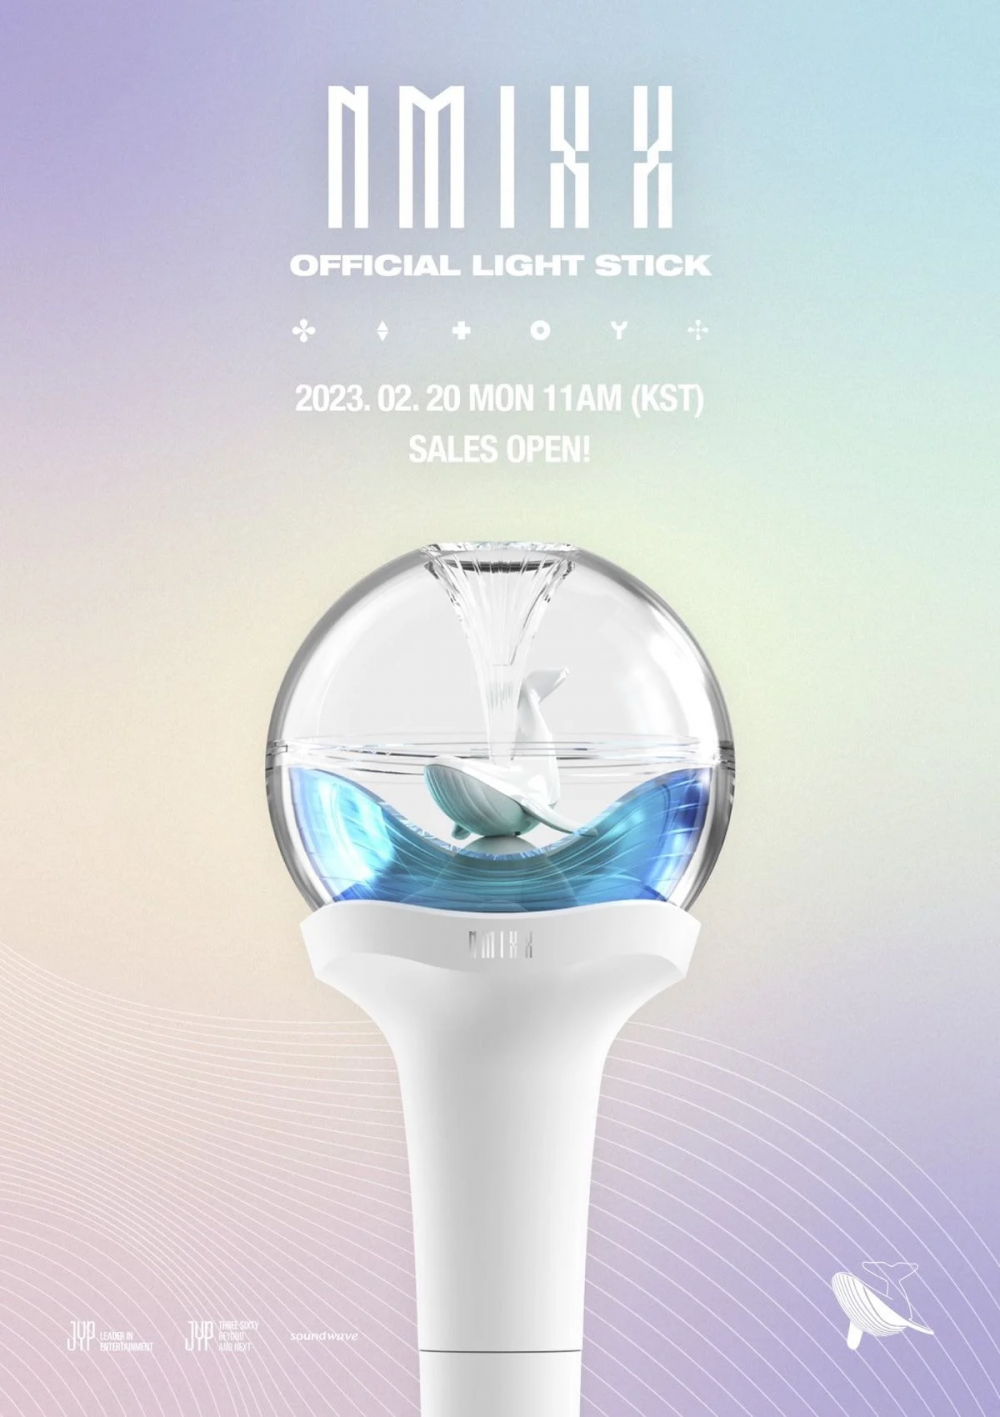 NMIXX finally fully lifts the veil on their official light stick!